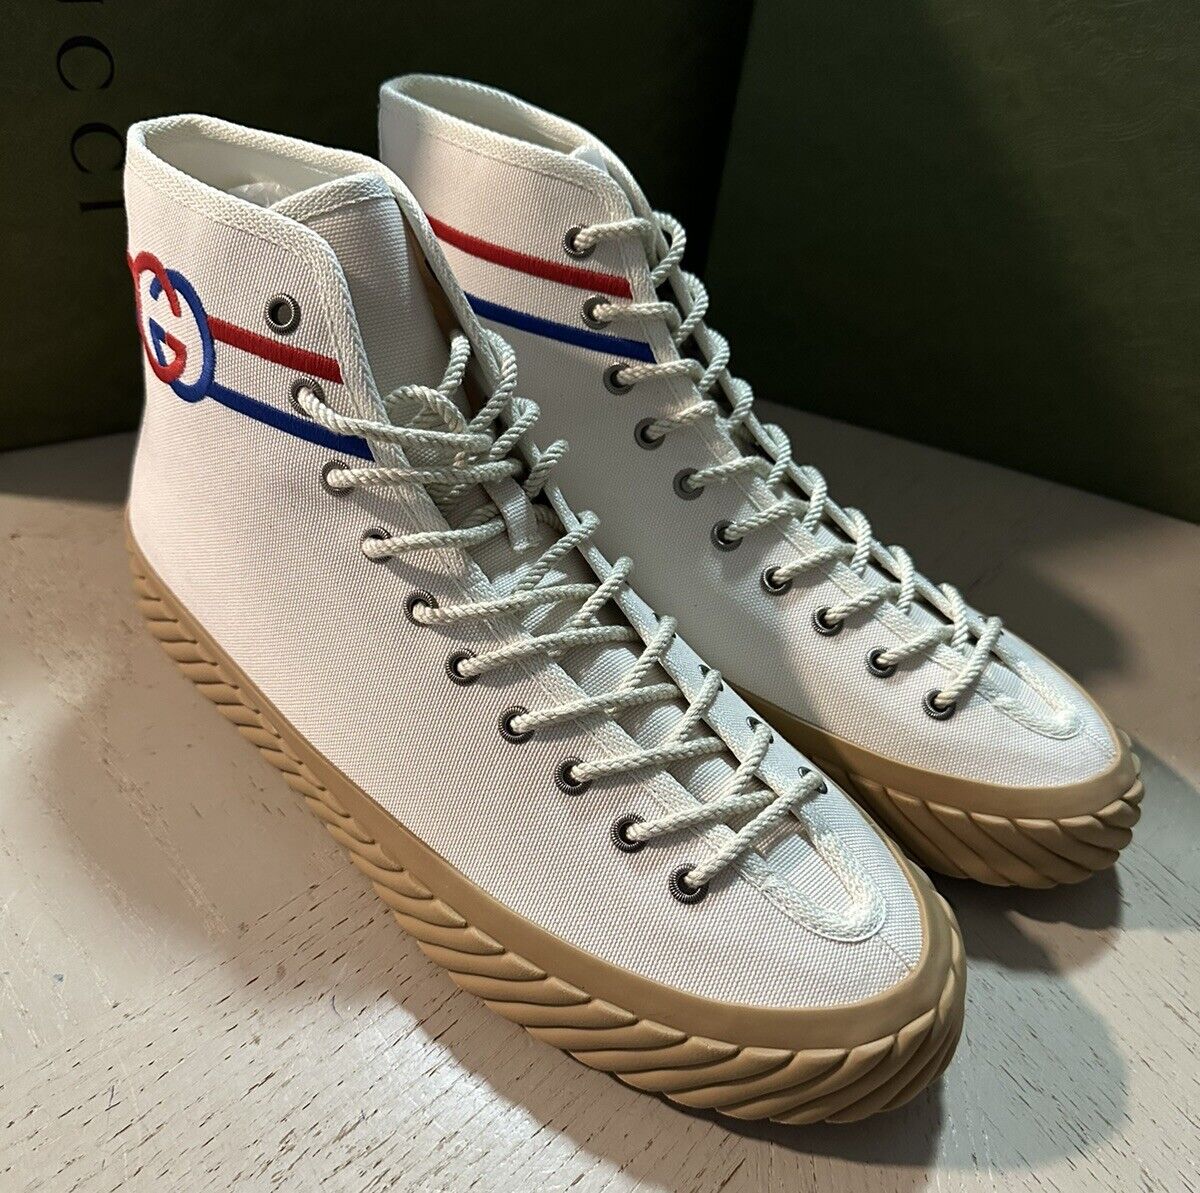 New $750 Gucci Men Canvas High-top Sneakers Myst White 8.5 US/8 UK 703033